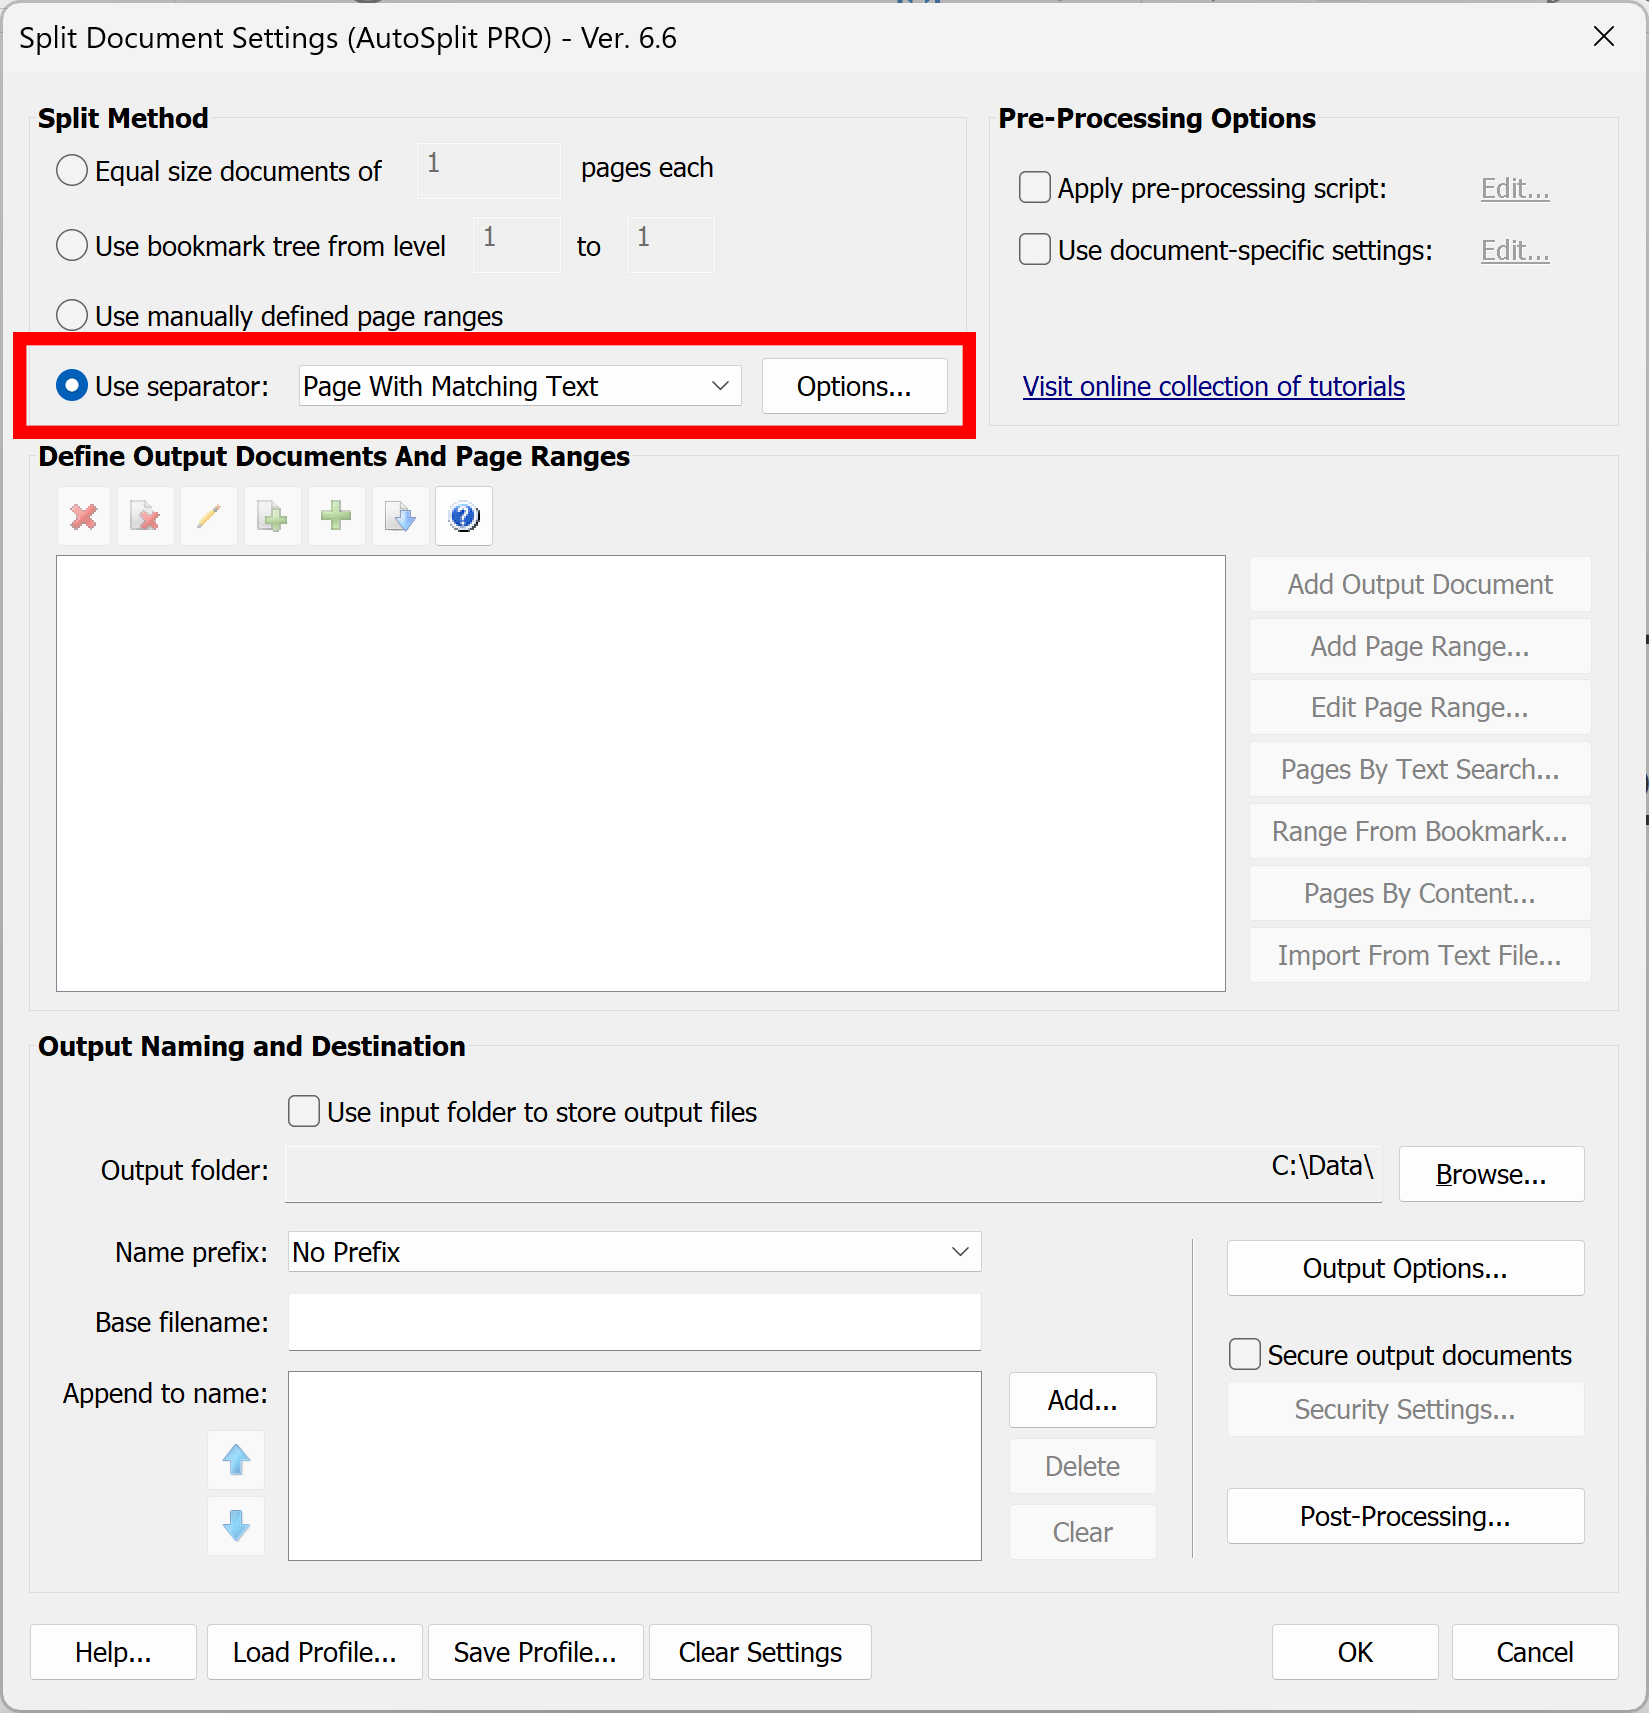 Select Page with Matching Text splitting option